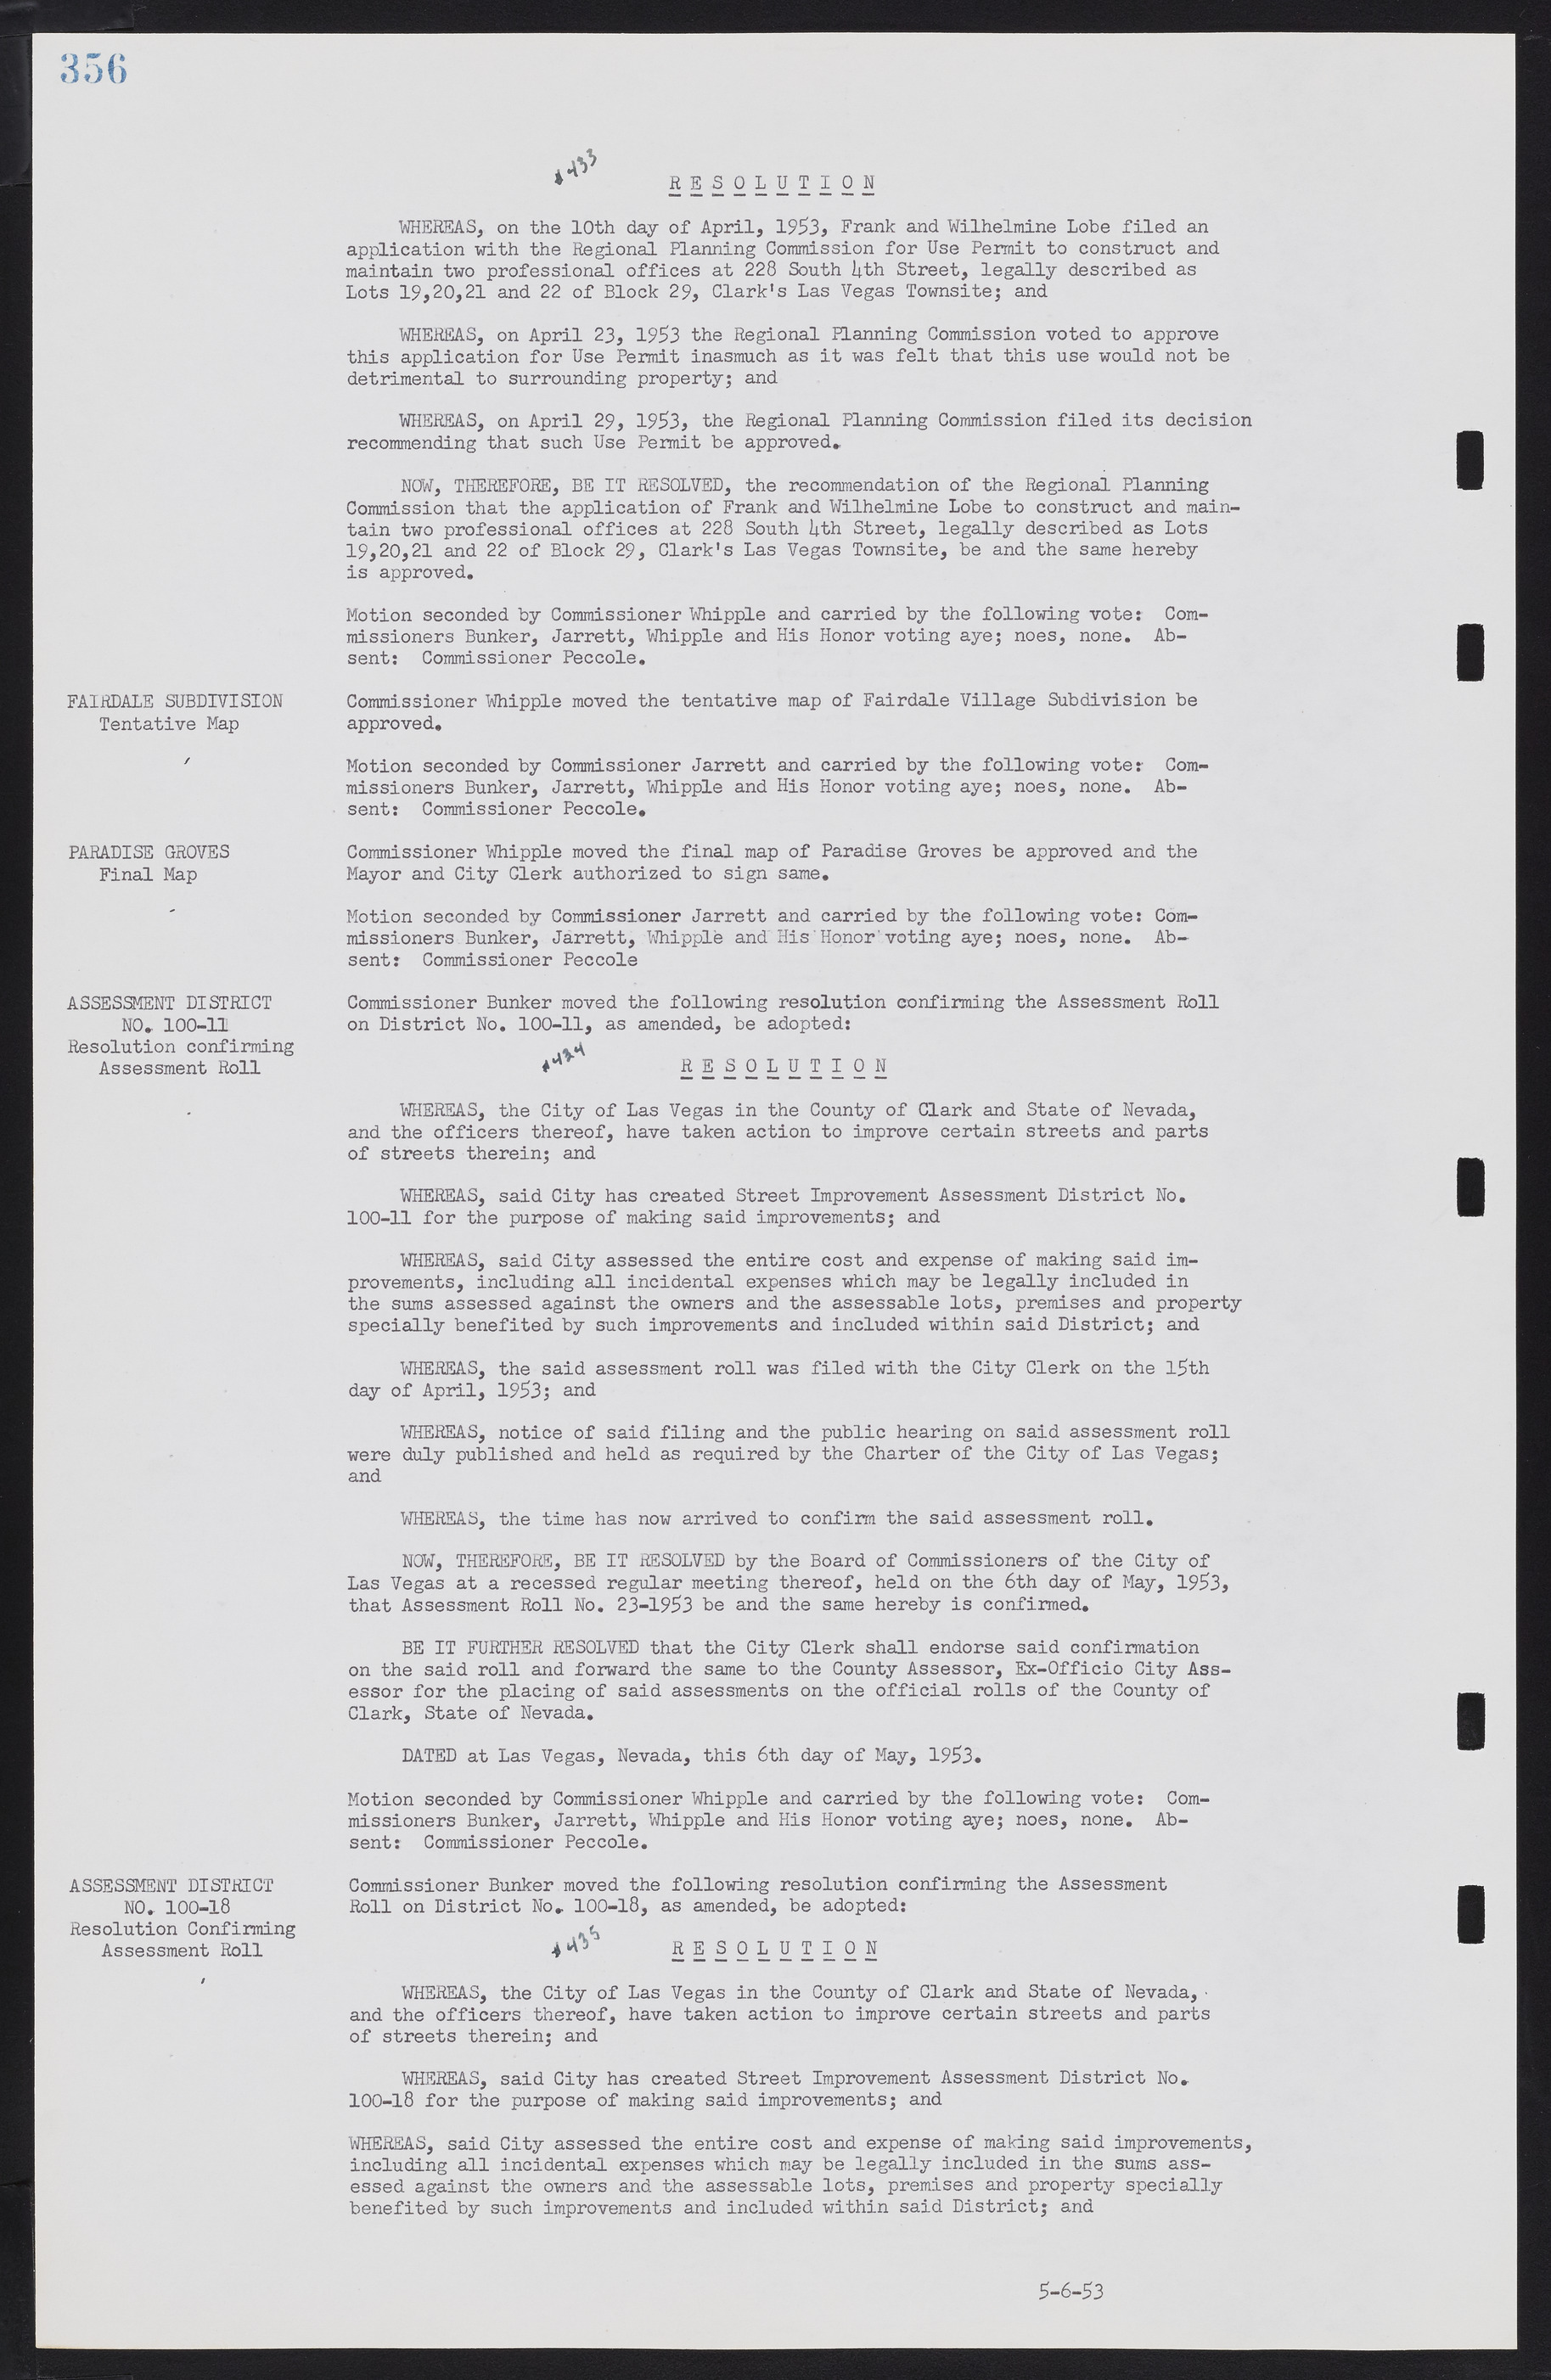 Las Vegas City Commission Minutes, May 26, 1952 to February 17, 1954, lvc000008-384